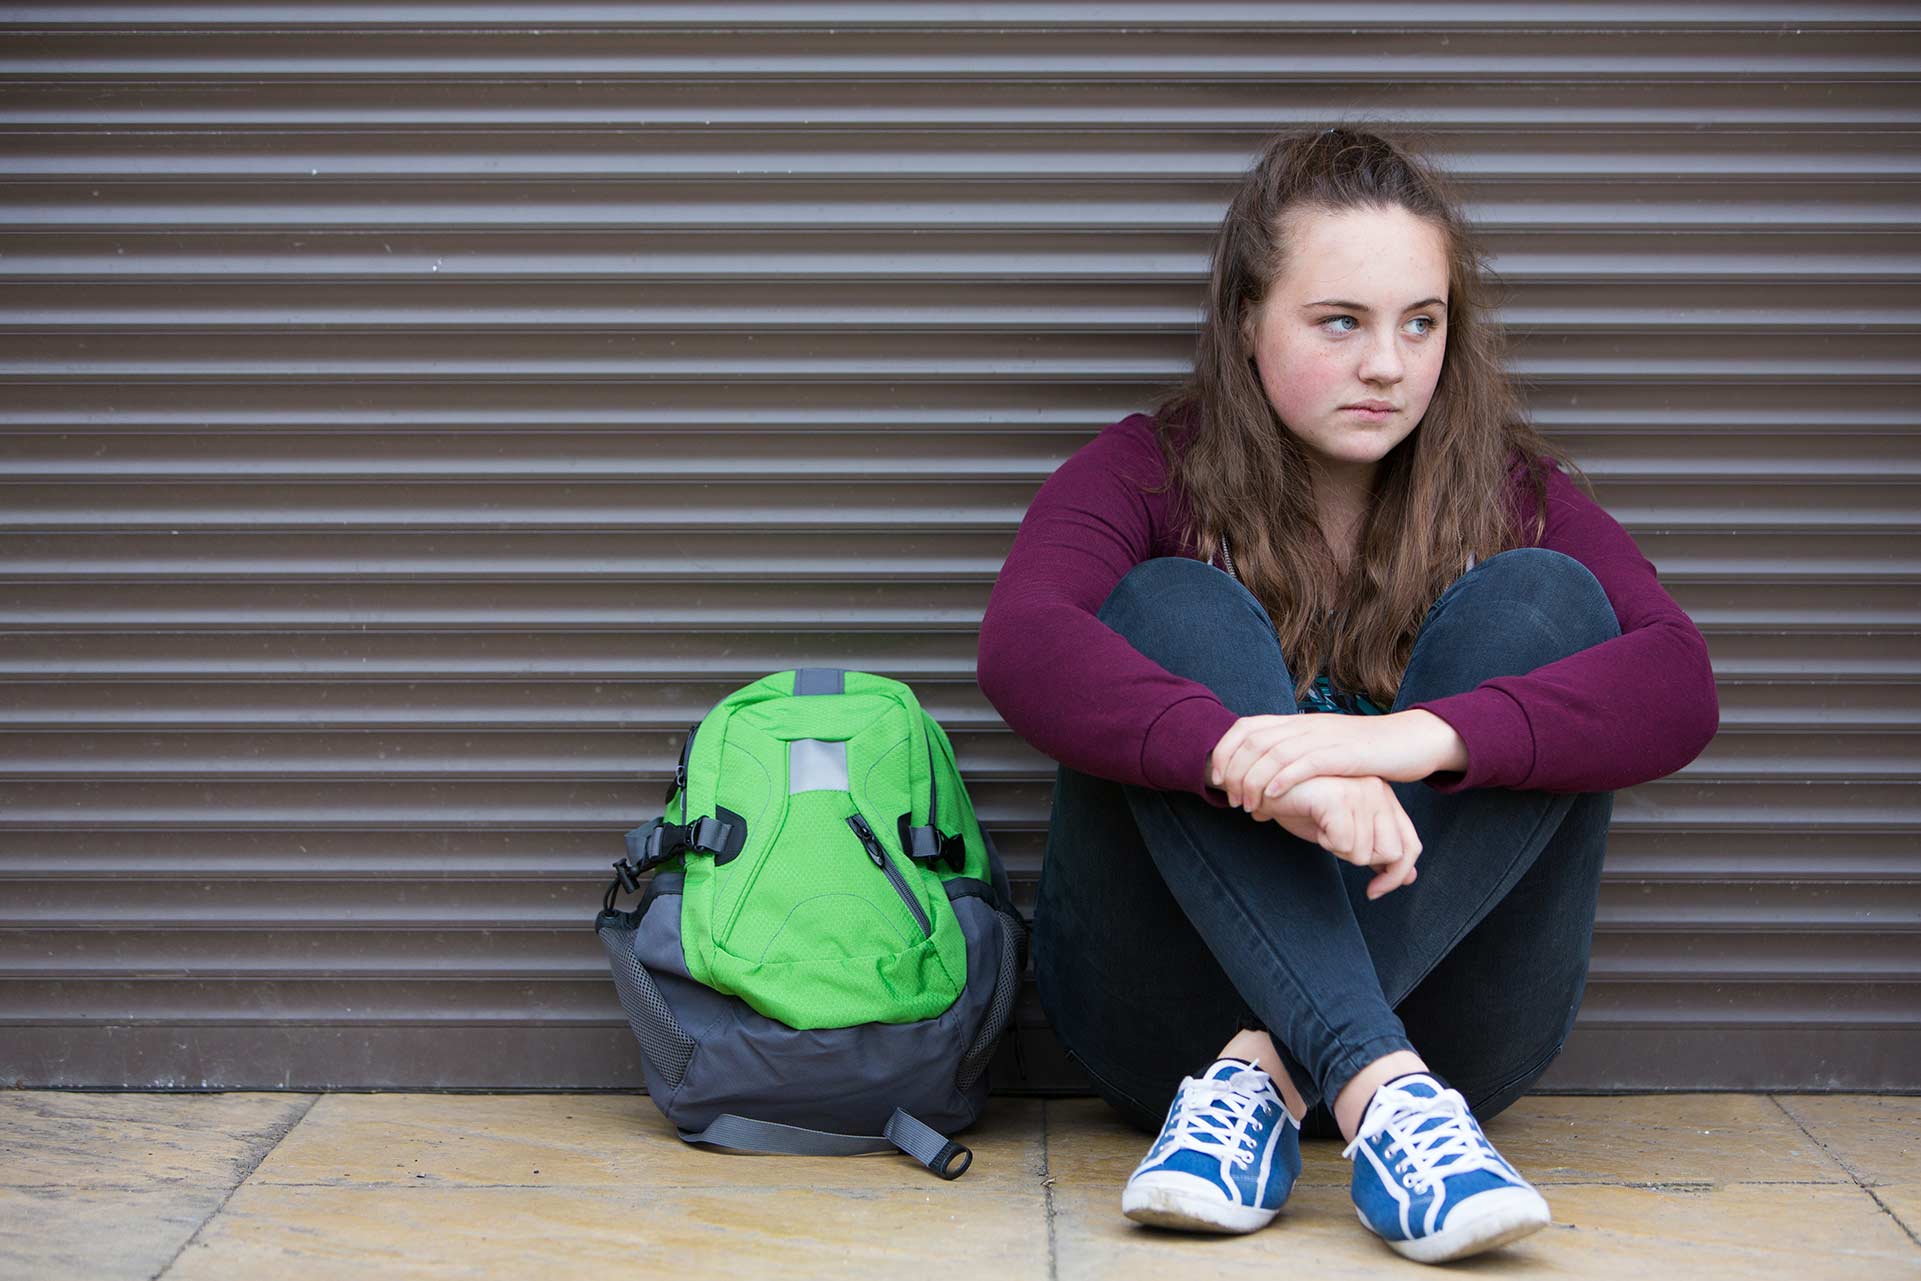 Youth homelessness is a community issue